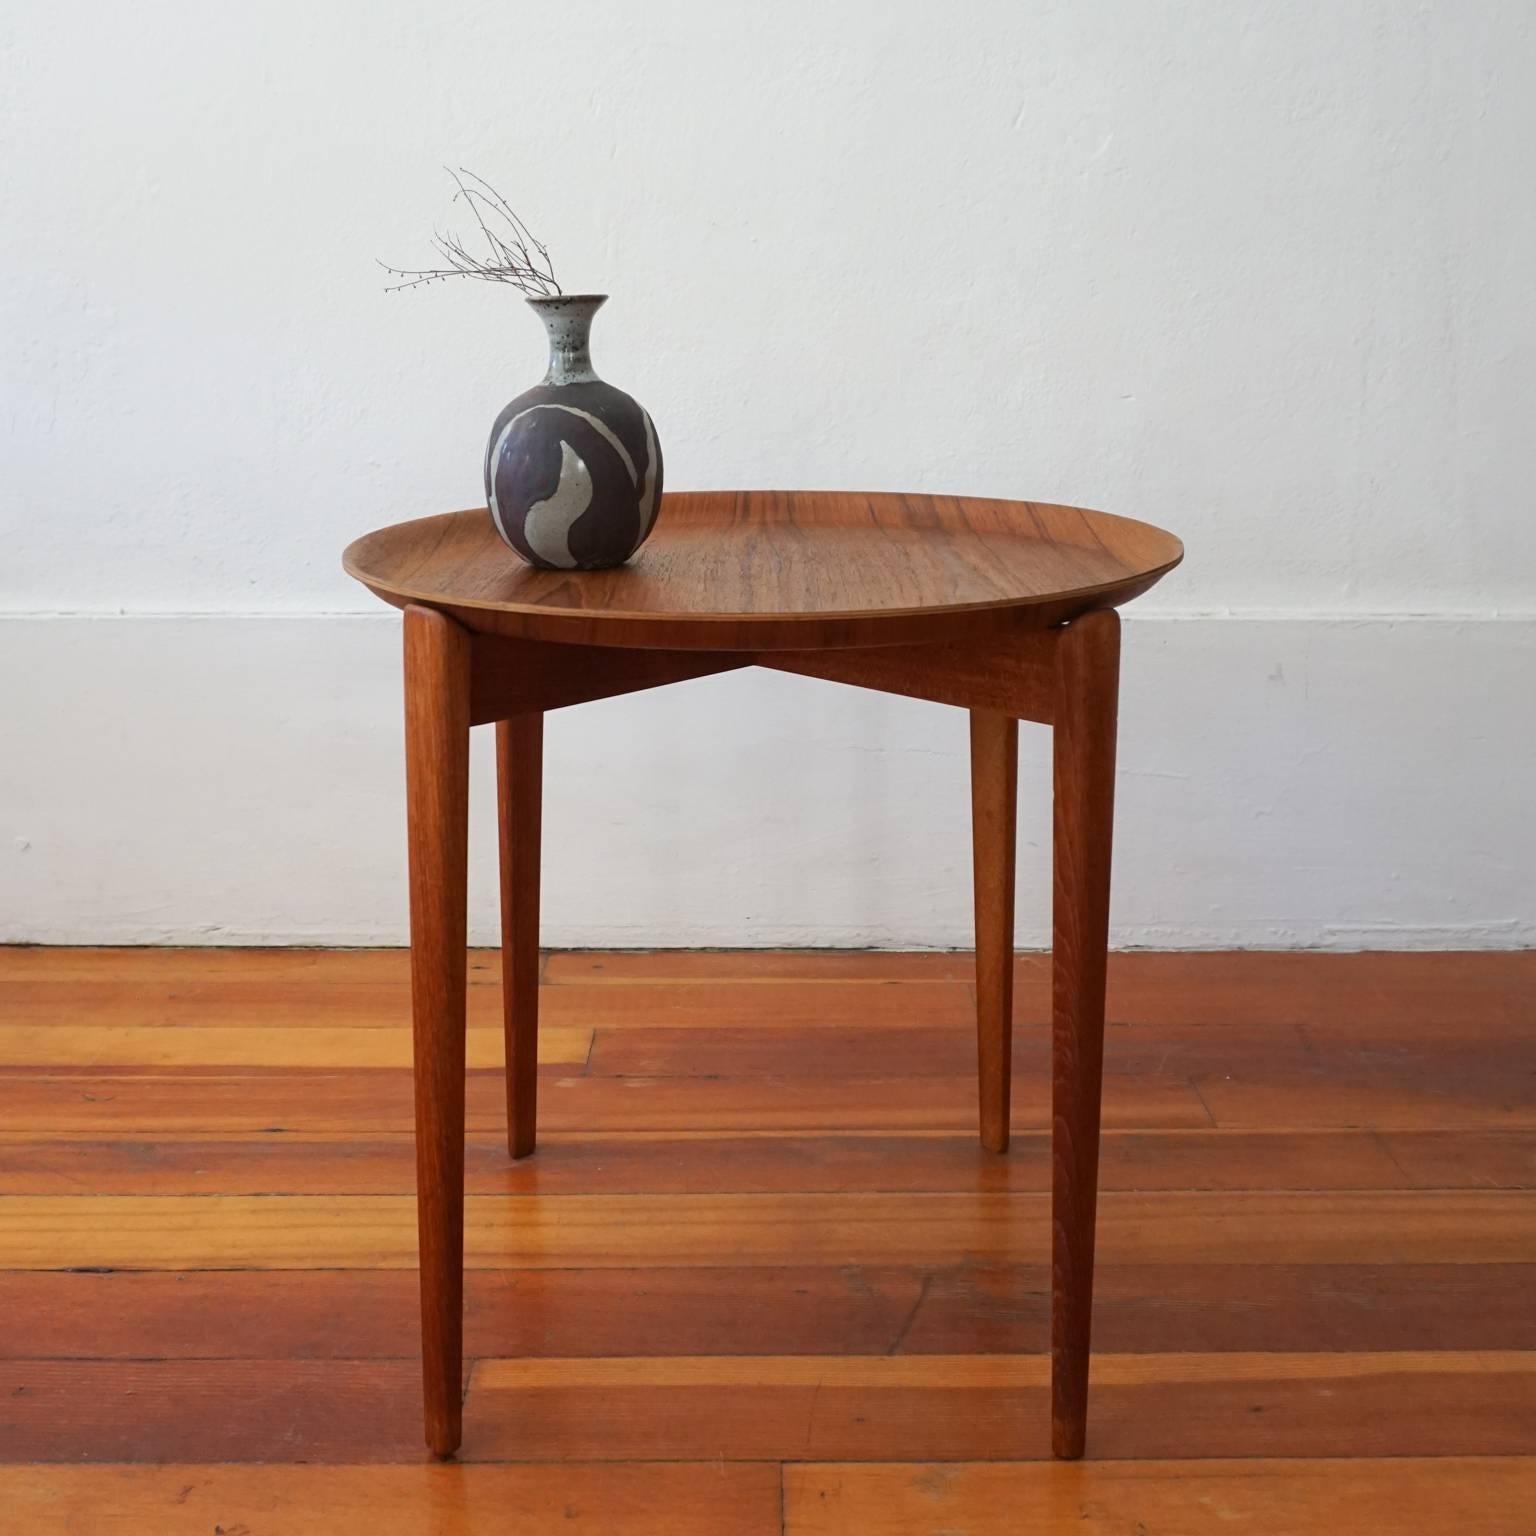 Removable top tray table. Molded teak top and solid teak base. Made in Sweden, 1950s.